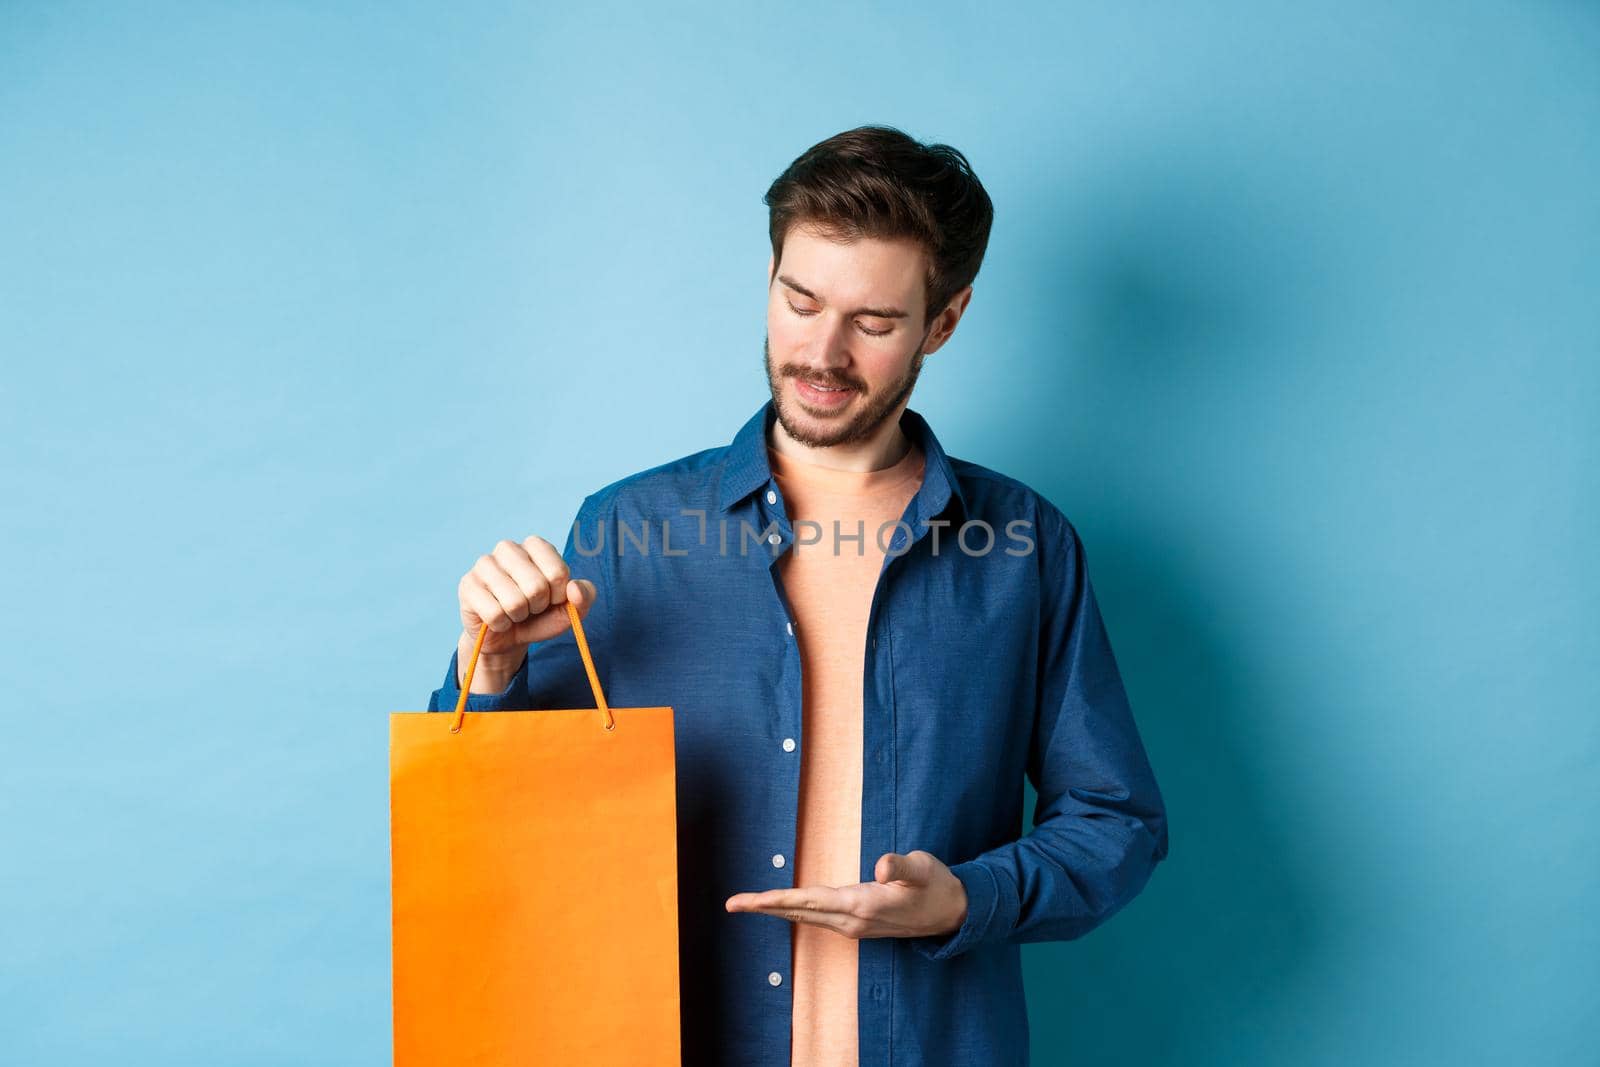 Young smiling guy showing orange shopping bag, demonstrating gift, standing on blue background.